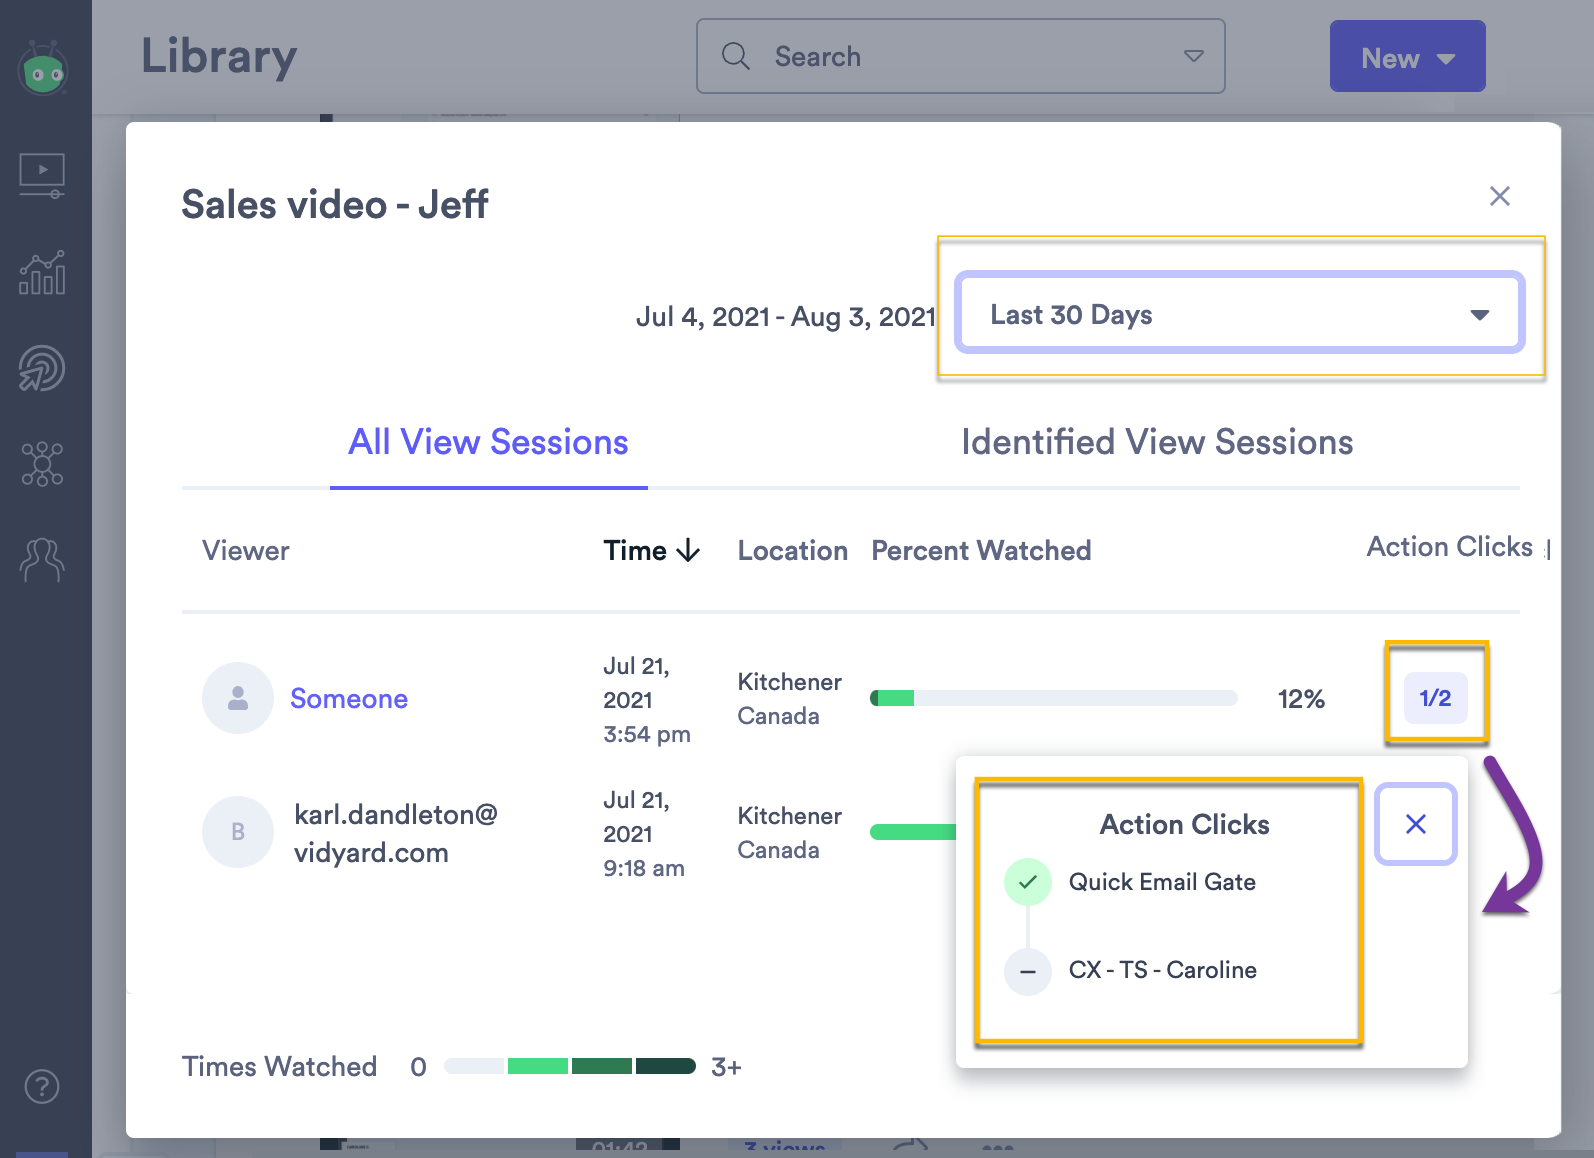 Video Insights card showing viewer information and Action clicks